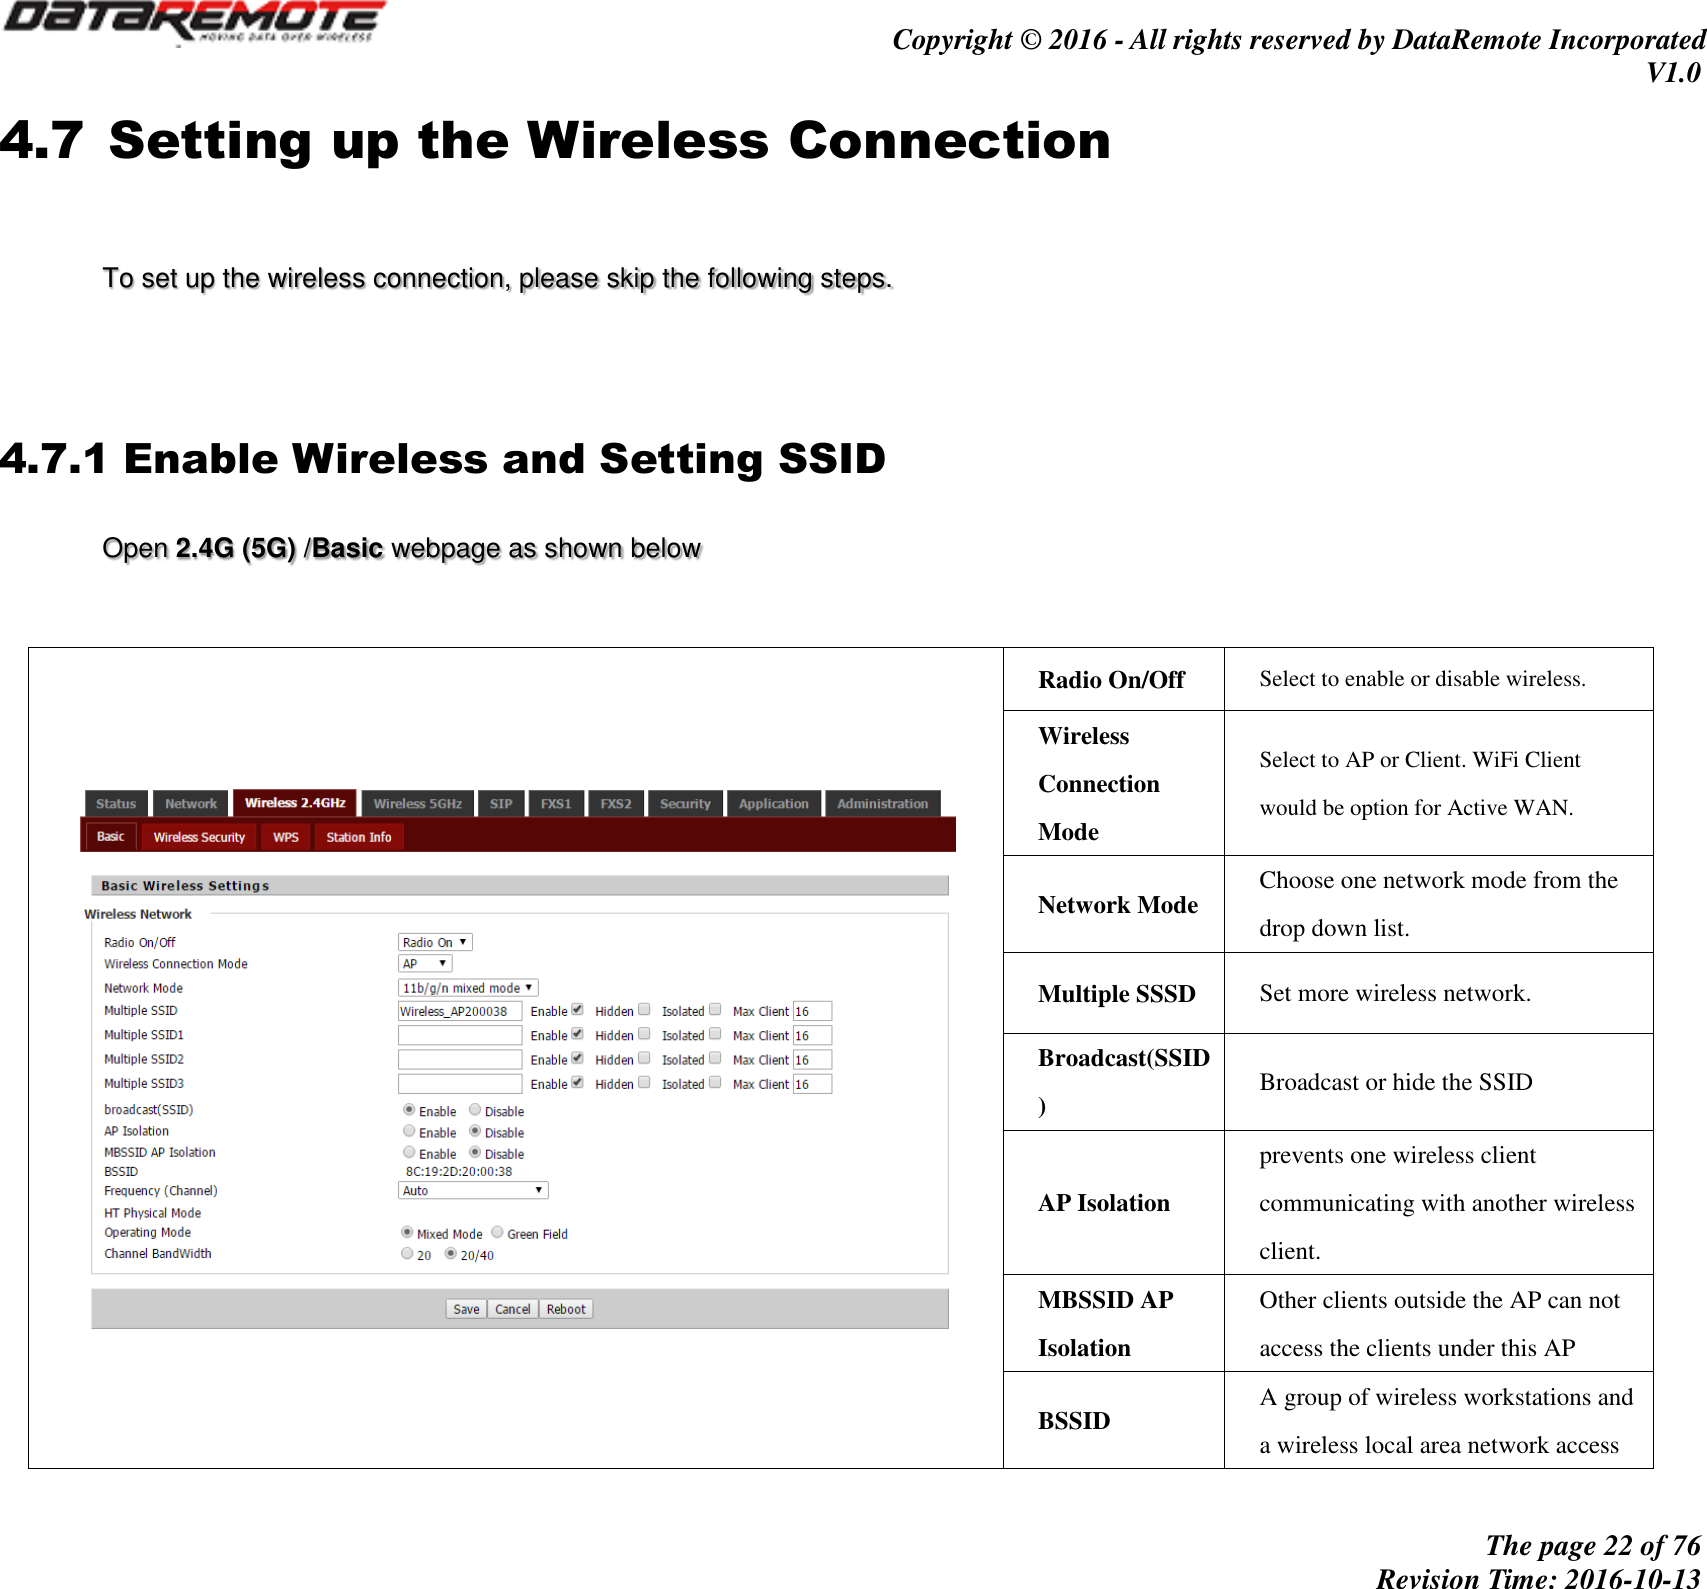                                         Copyright © 2016 - All rights reserved by DataRemote Incorporated V1.0                                                          The page 22 of 76 Revision Time: 2016-10-13     4.7 Setting up the Wireless Connection   To set up the wireless connection, please skip the following steps.     4.7.1 Enable Wireless and Setting SSID Open 2.4G (5G) /Basic webpage as shown below           Radio On/Off Select to enable or disable wireless. Wireless Connection Mode Select to AP or Client. WiFi Client would be option for Active WAN. Network Mode Choose one network mode from the drop down list. Multiple SSSD Set more wireless network. Broadcast(SSID) Broadcast or hide the SSID AP Isolation prevents one wireless client communicating with another wireless client. MBSSID AP Isolation Other clients outside the AP can not access the clients under this AP BSSID A group of wireless workstations and a wireless local area network access 